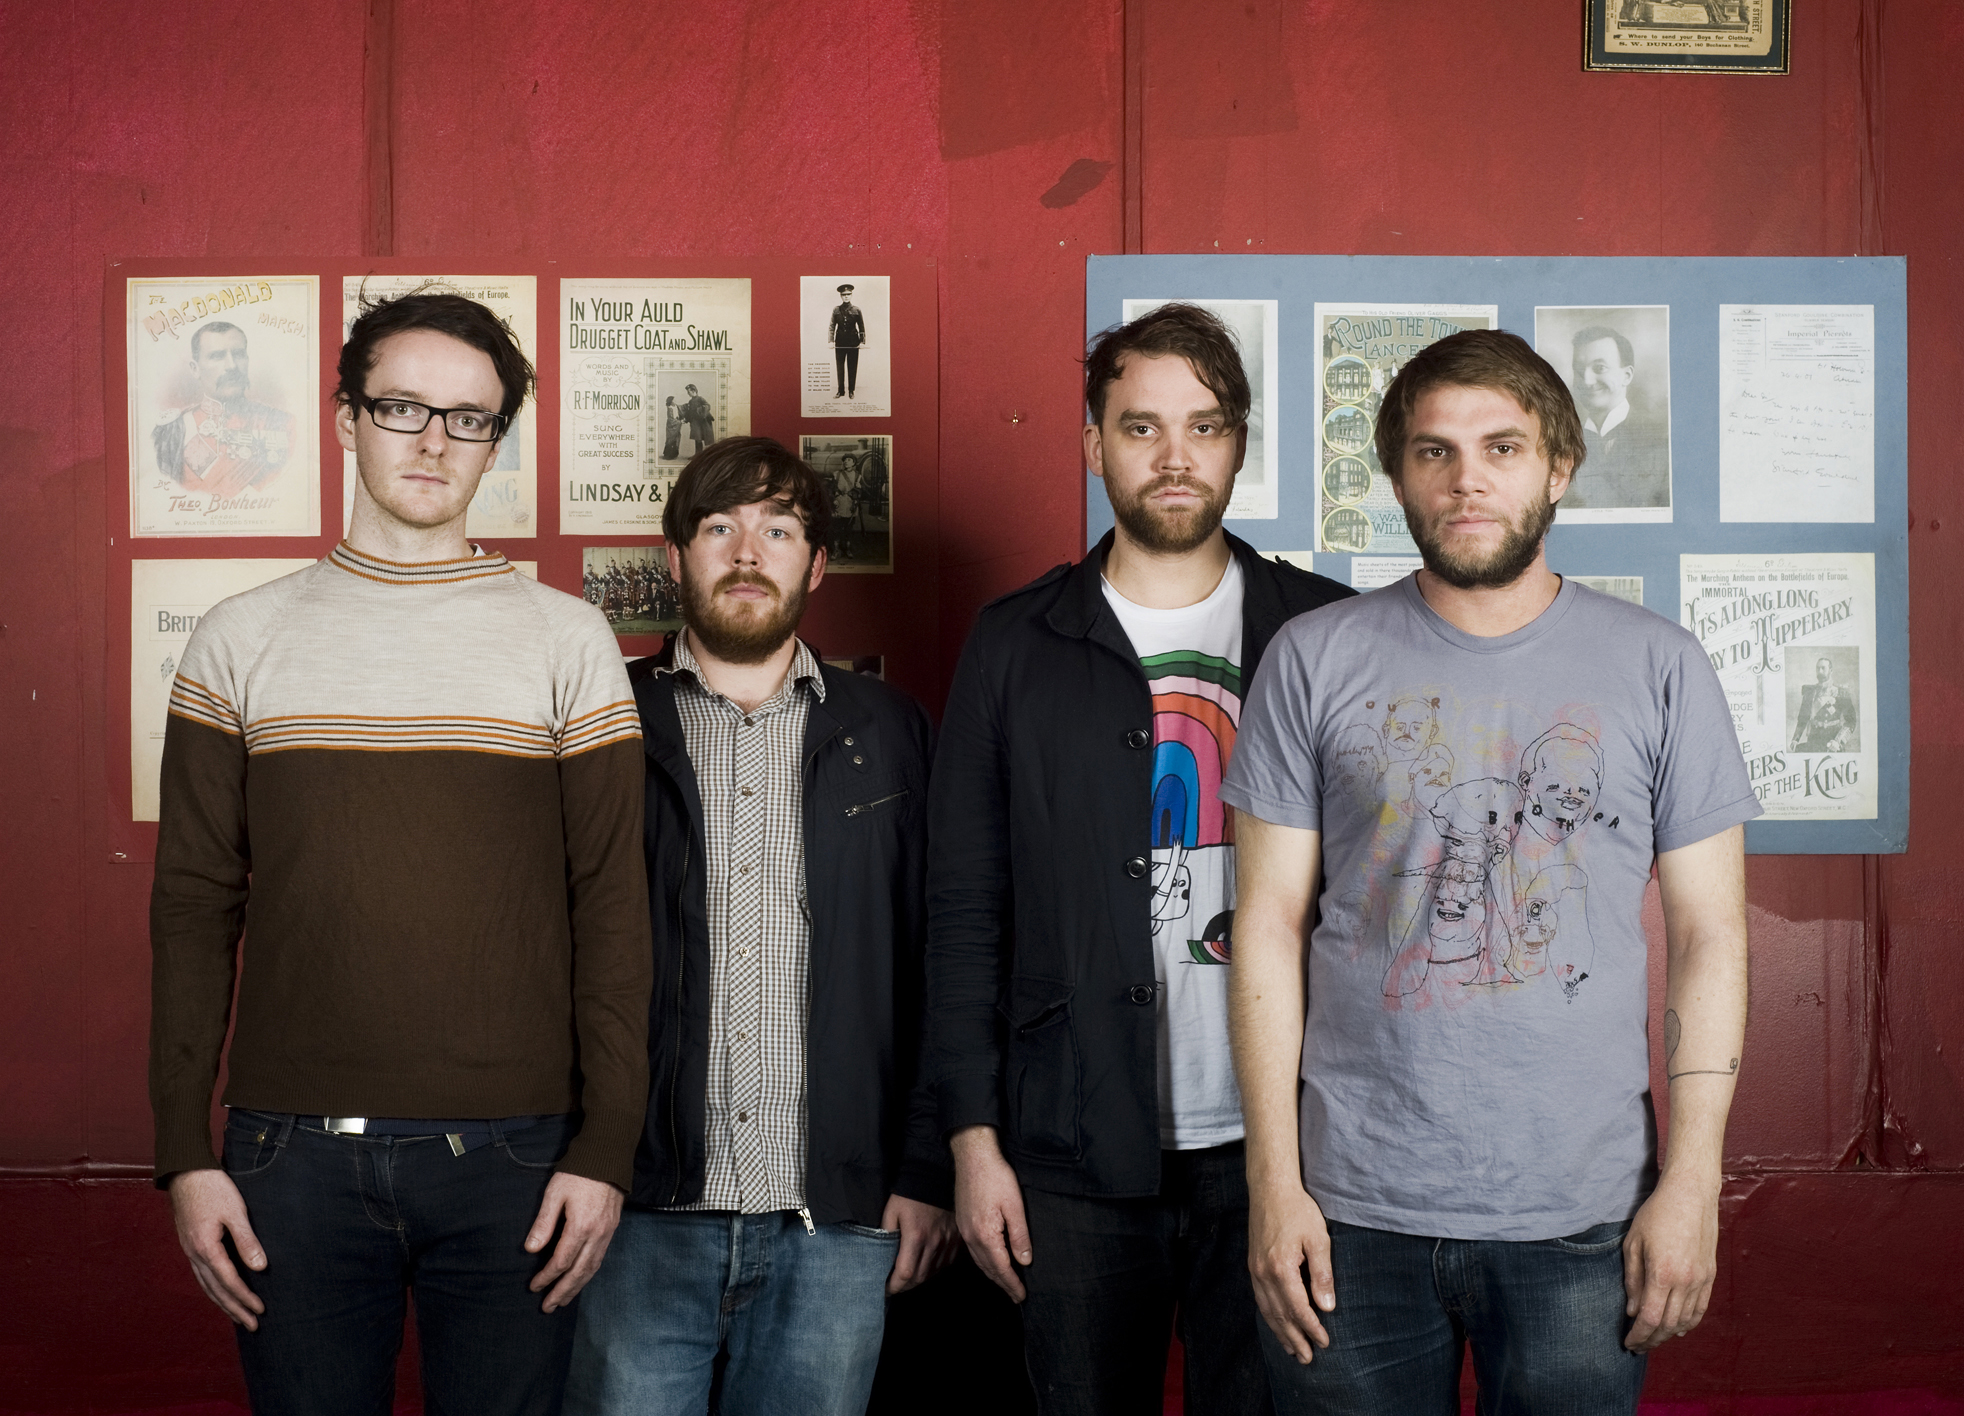 Frightened Rabbit - The Loneliness And The Scream